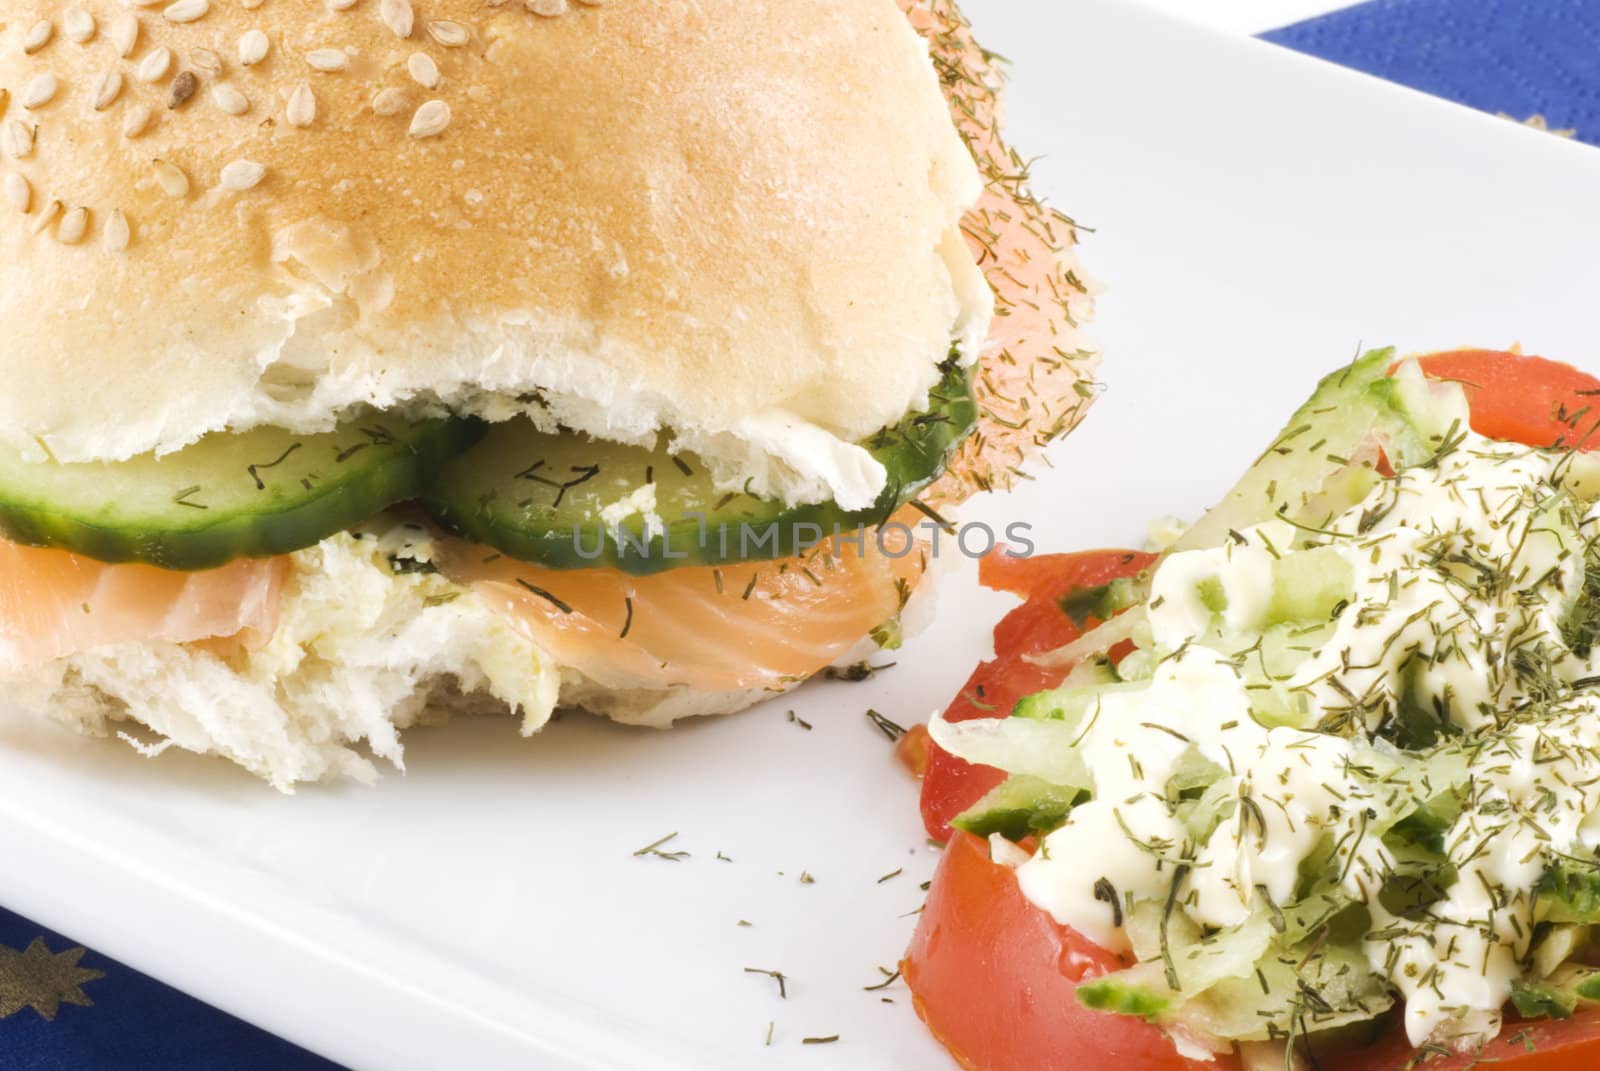 Close up of a sesame bun with salmon and cucumber with a tomato salad on the side.